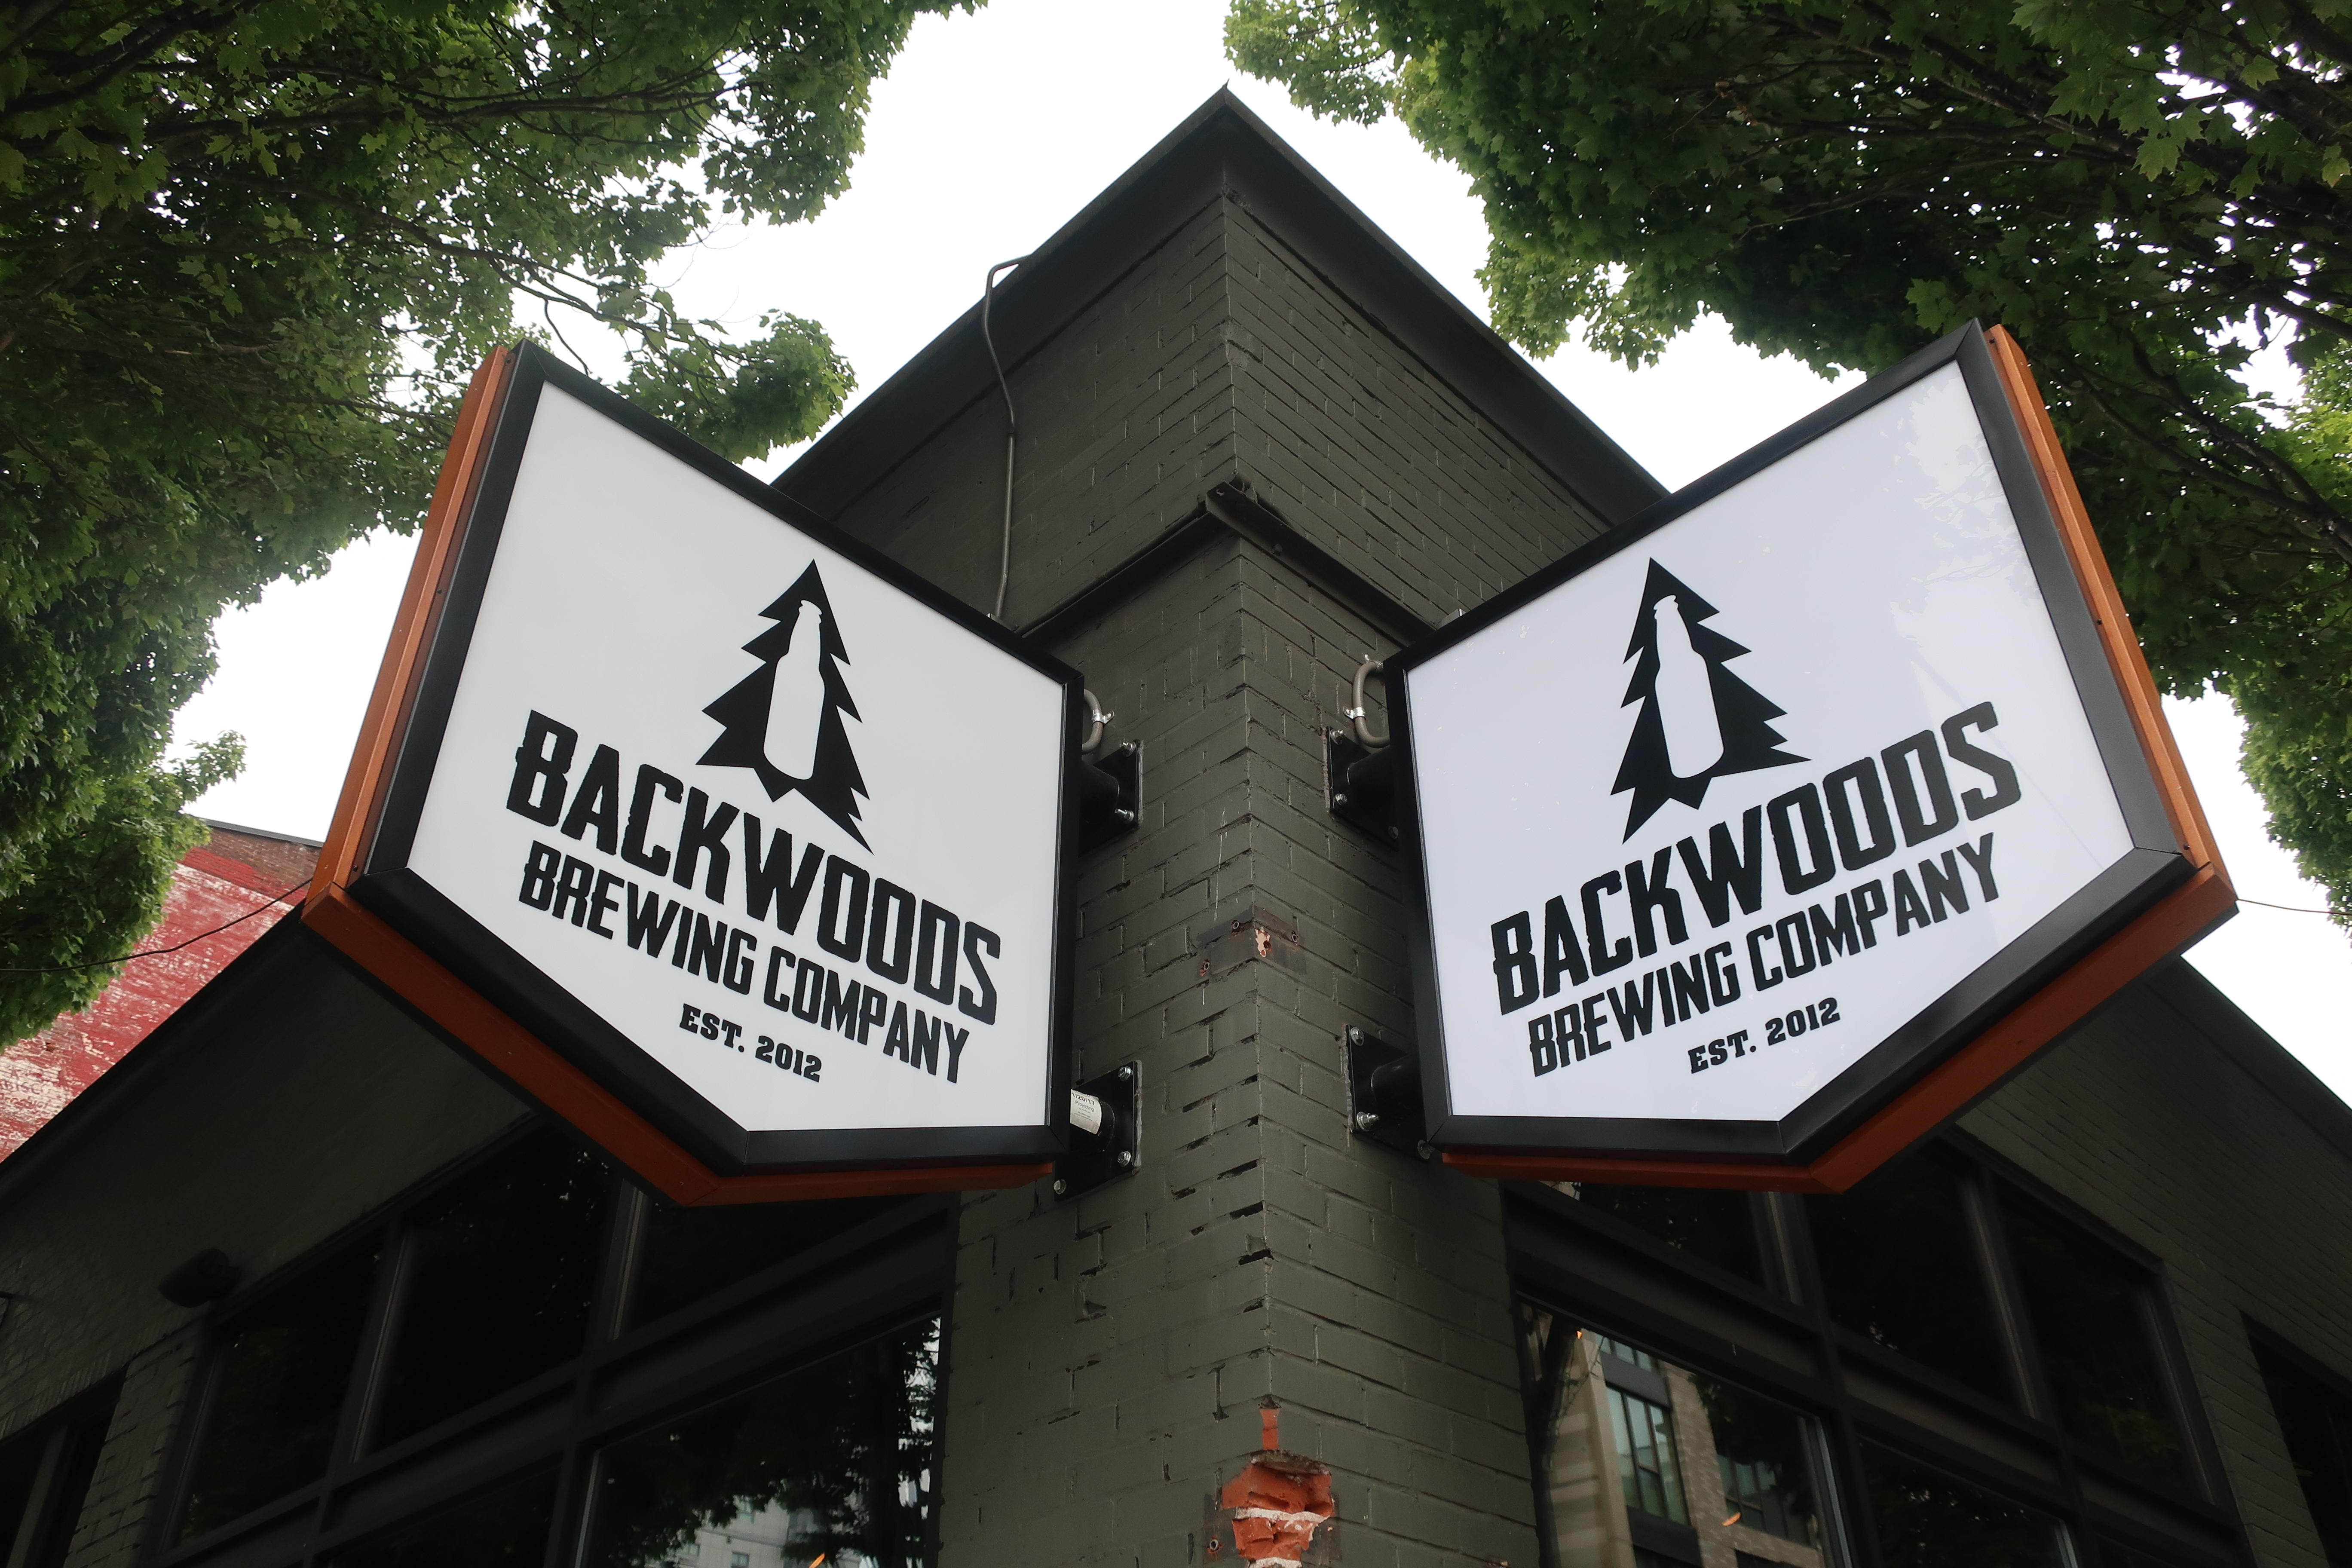 Backwoods In The Pearl is located in Portland's Brewery Blocks.